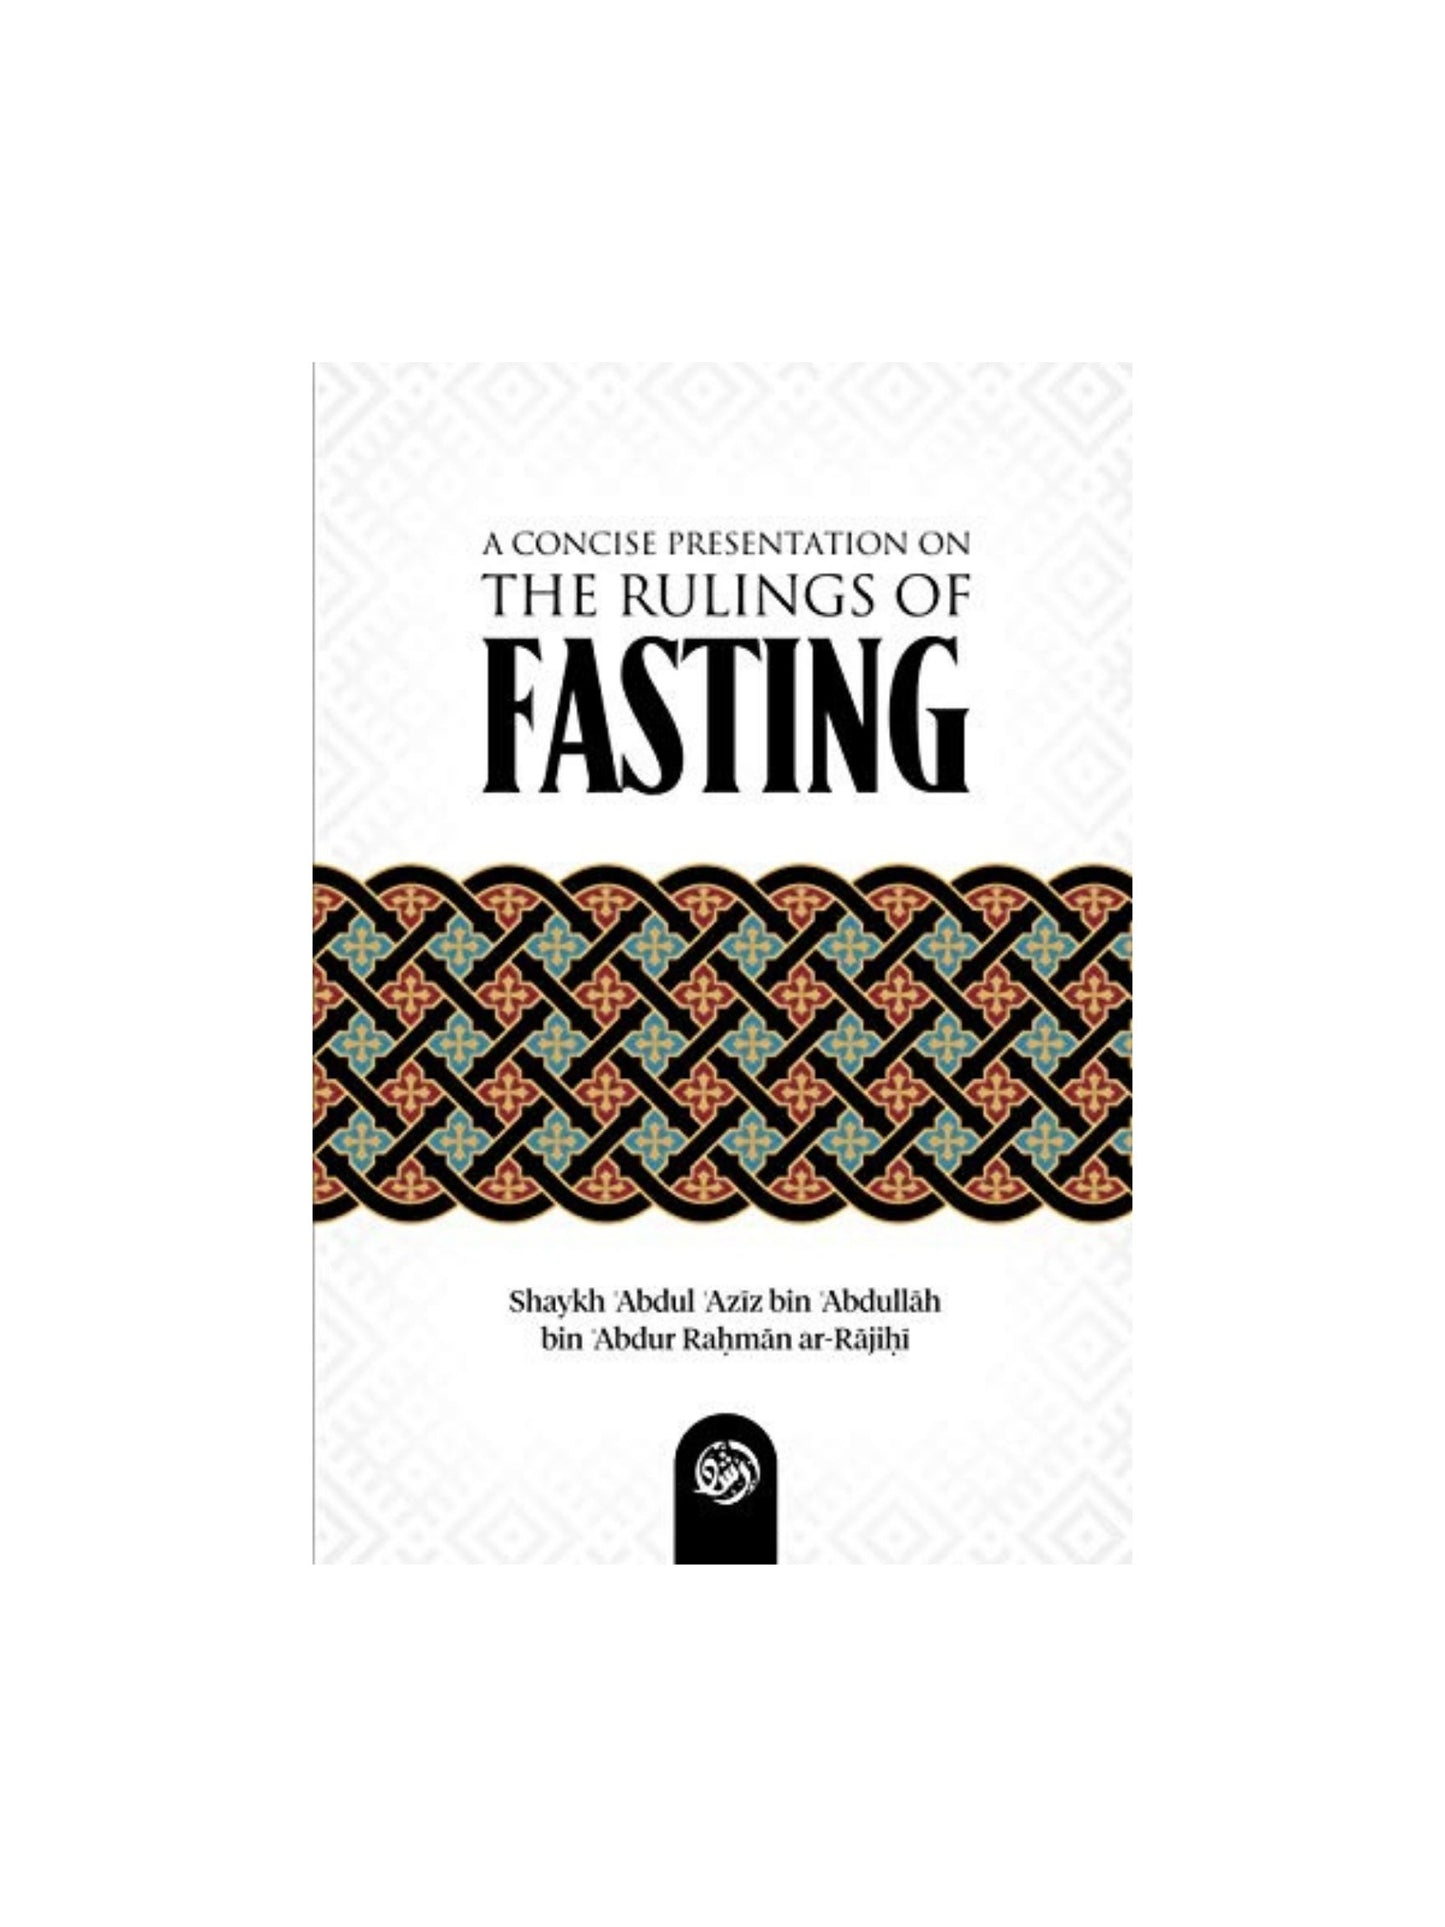 A CONCISE PRESENTATION ON THE RULINGS OF FASTING